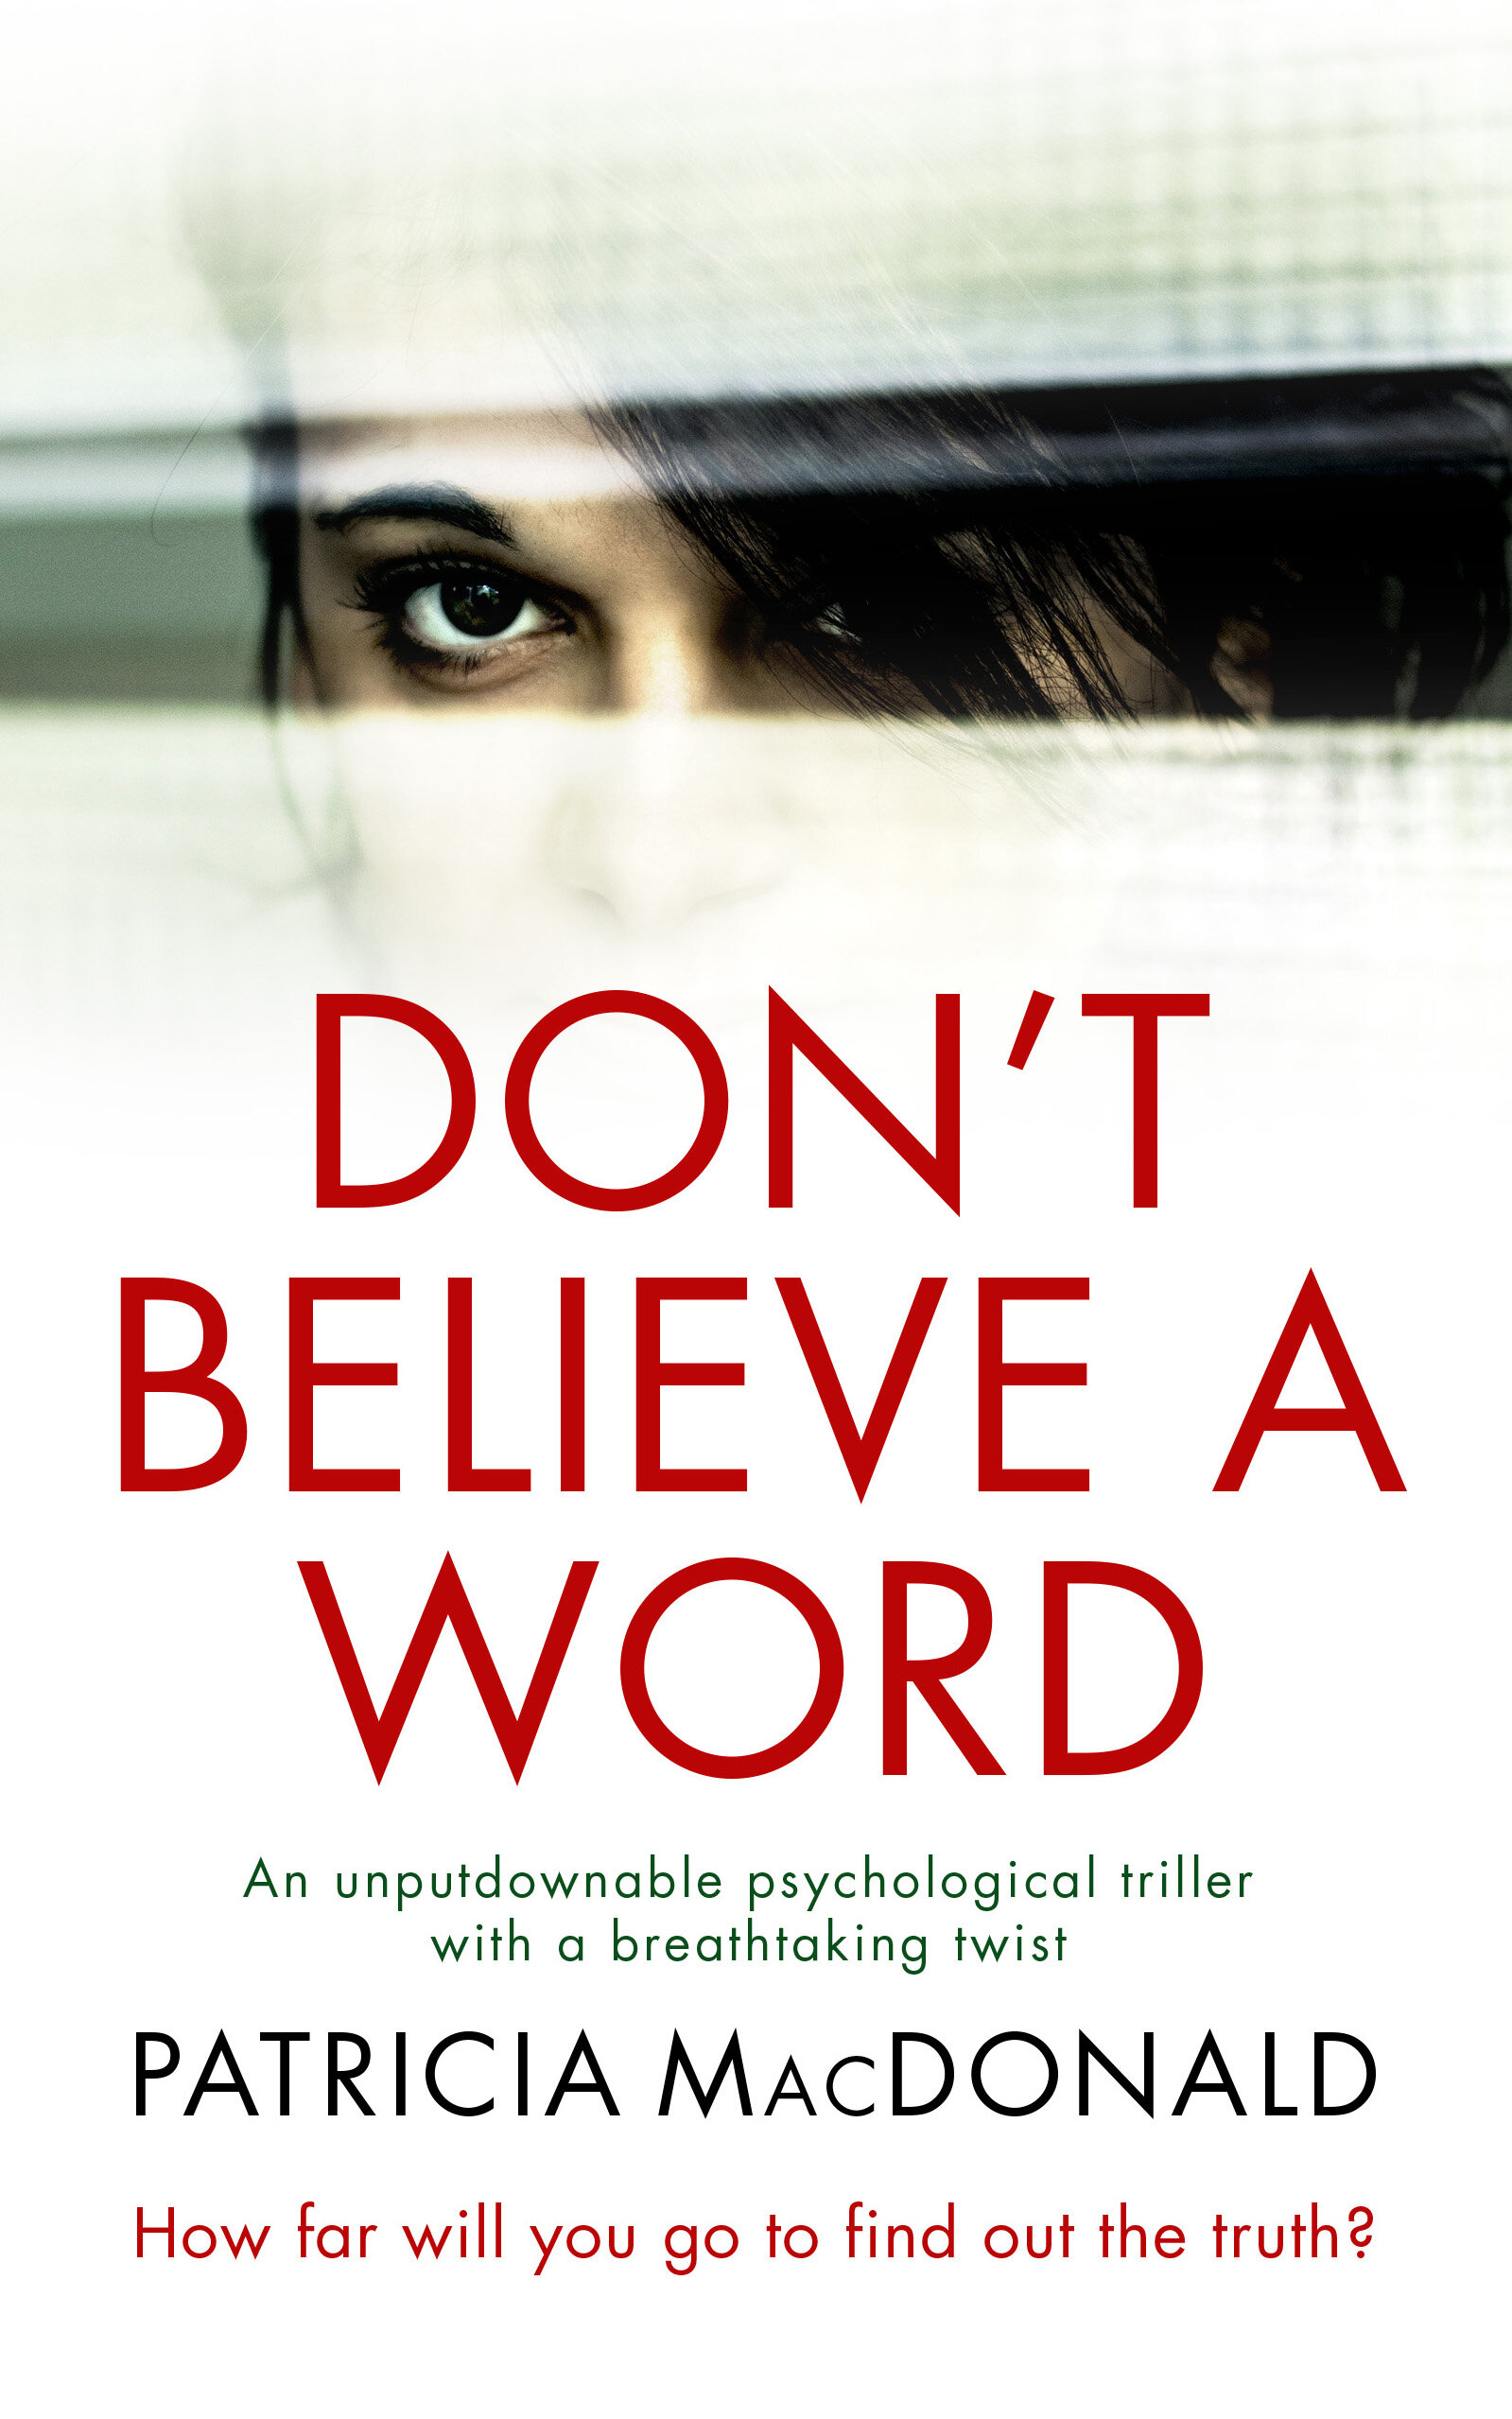 DON'T BELIEVE A WORD publish cover.jpg